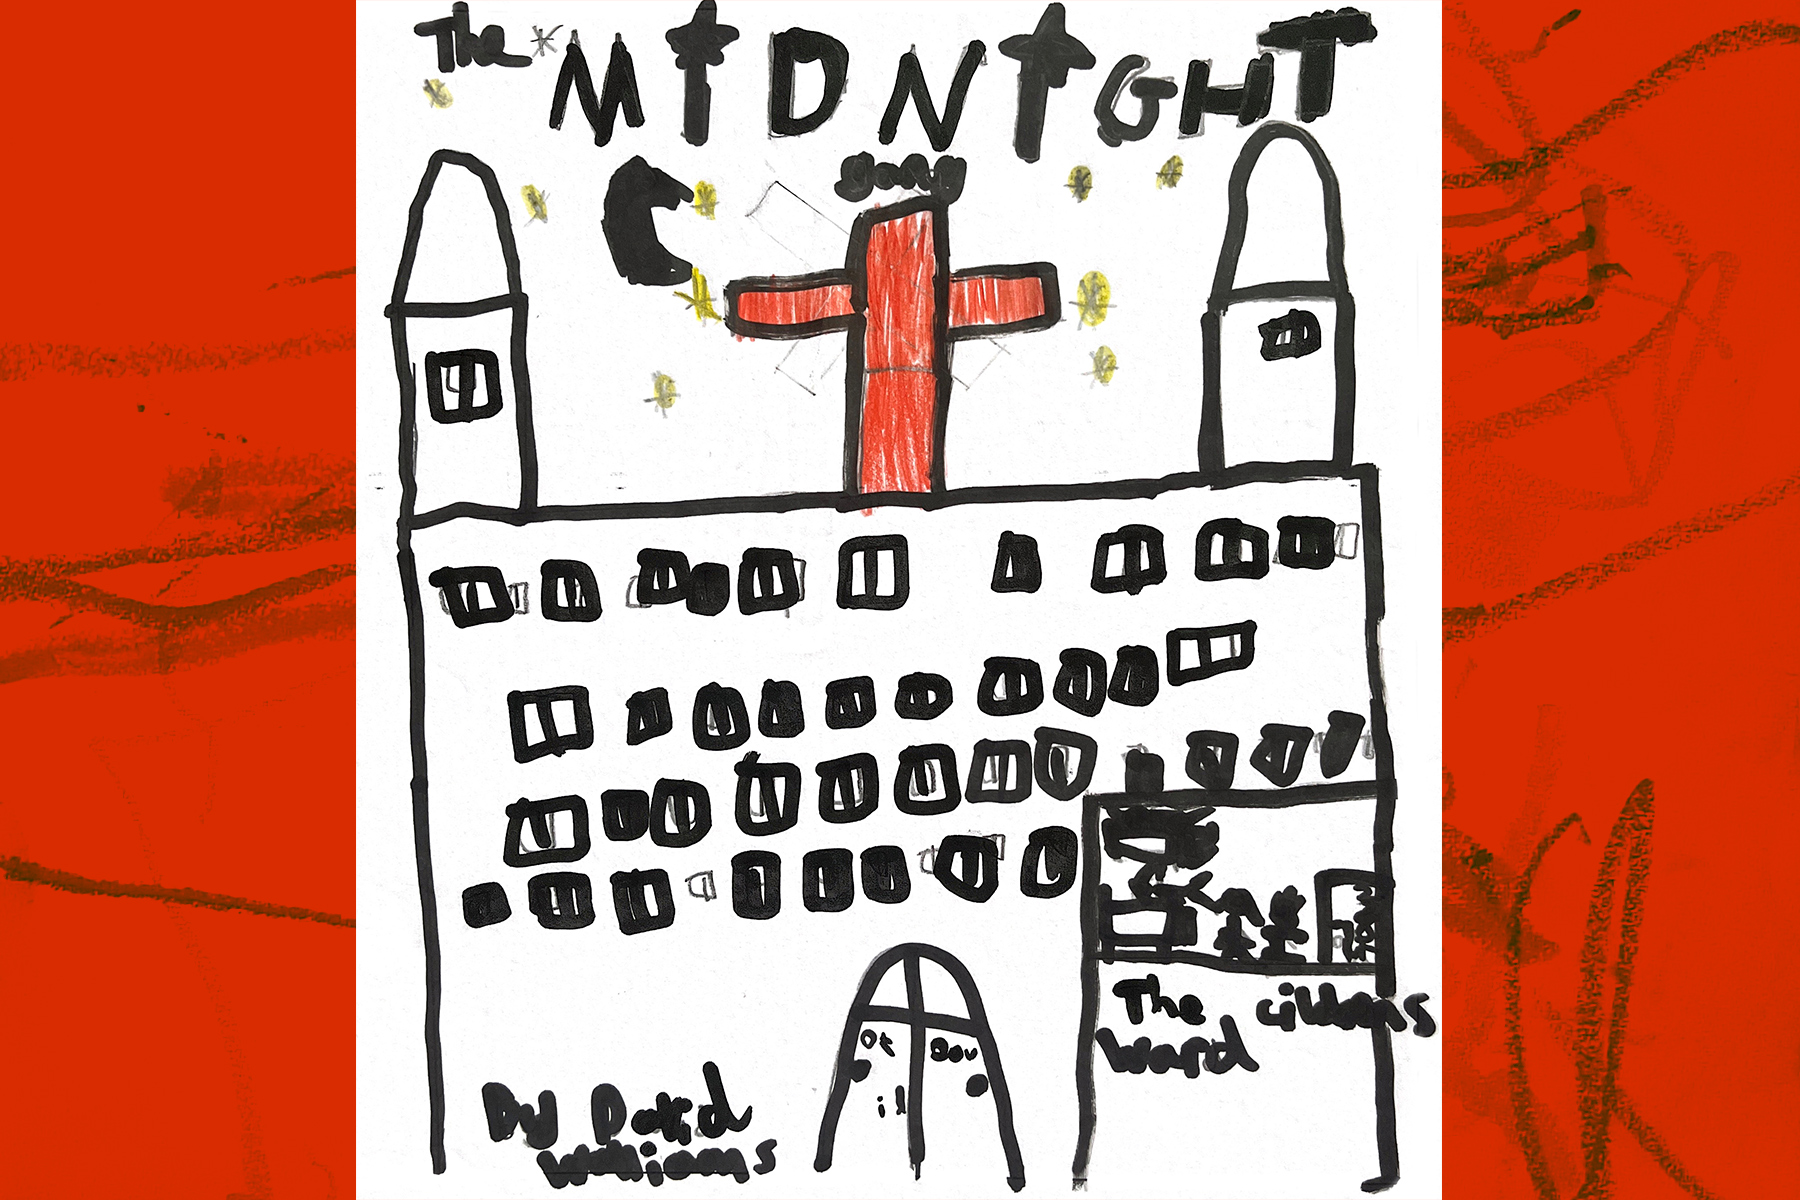 A book cover drawn by a child